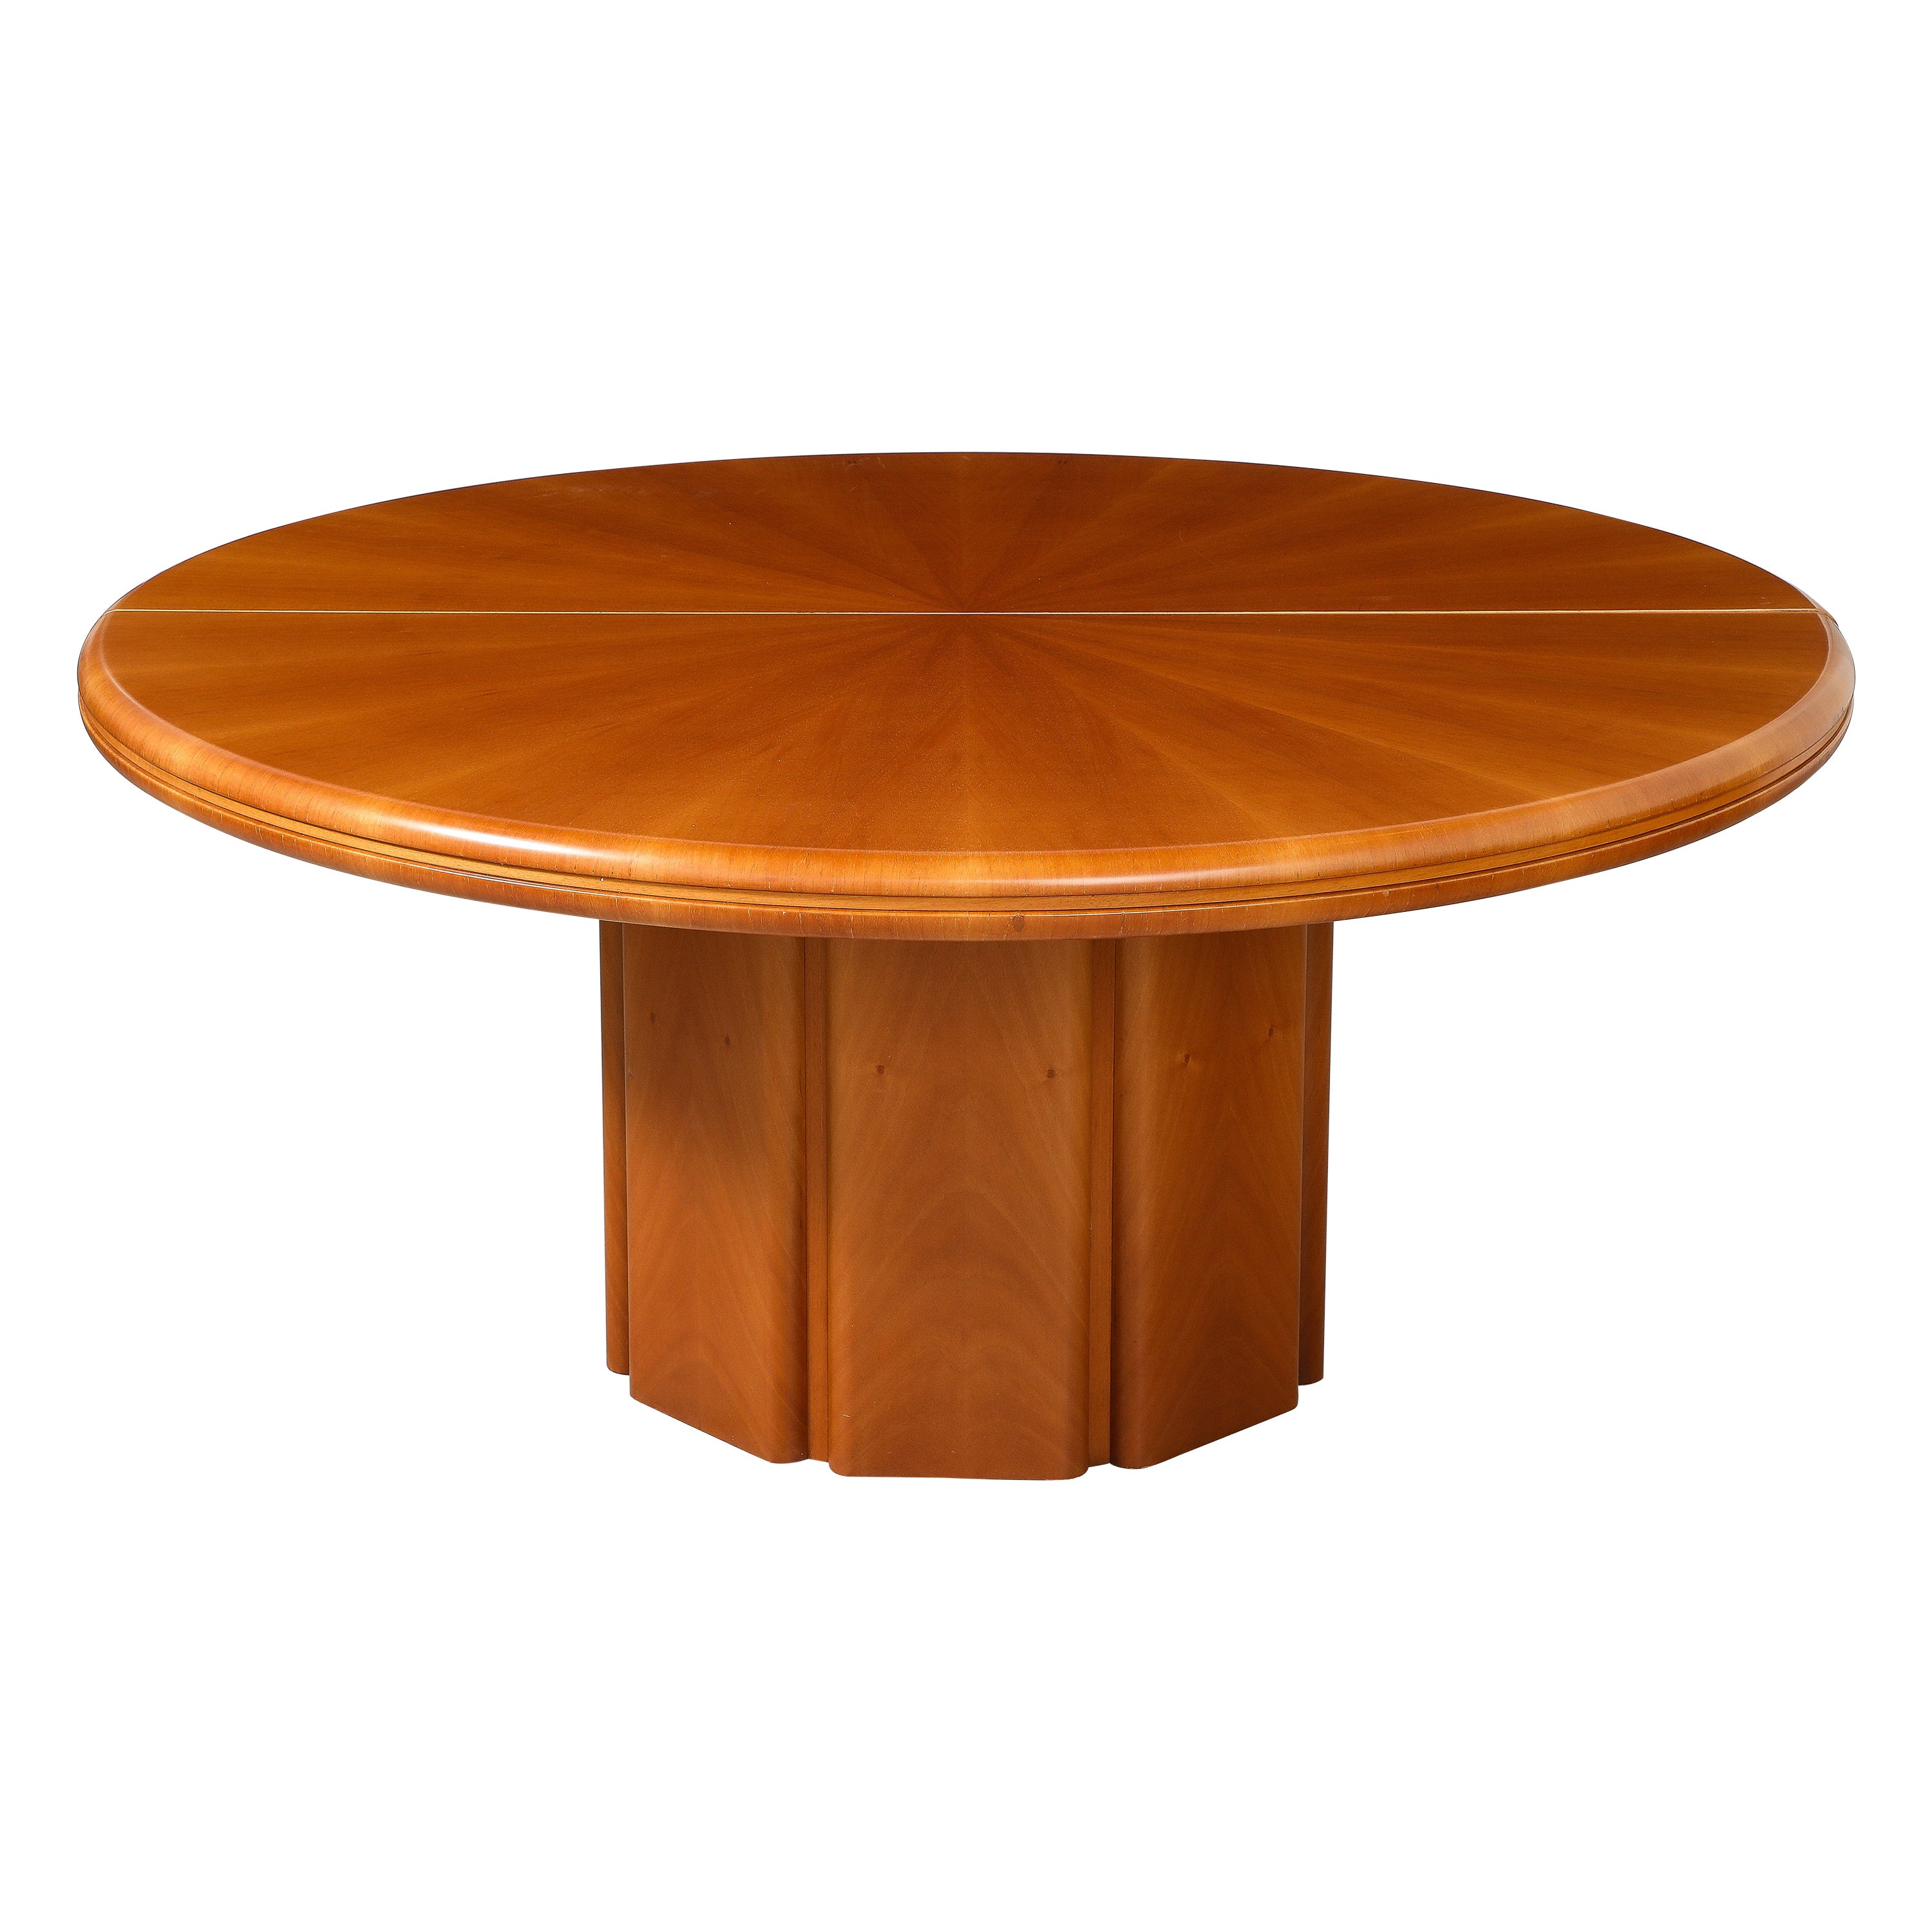 Italian Modernist Maple Wood Center / Dining Table, circa 1970  For Sale